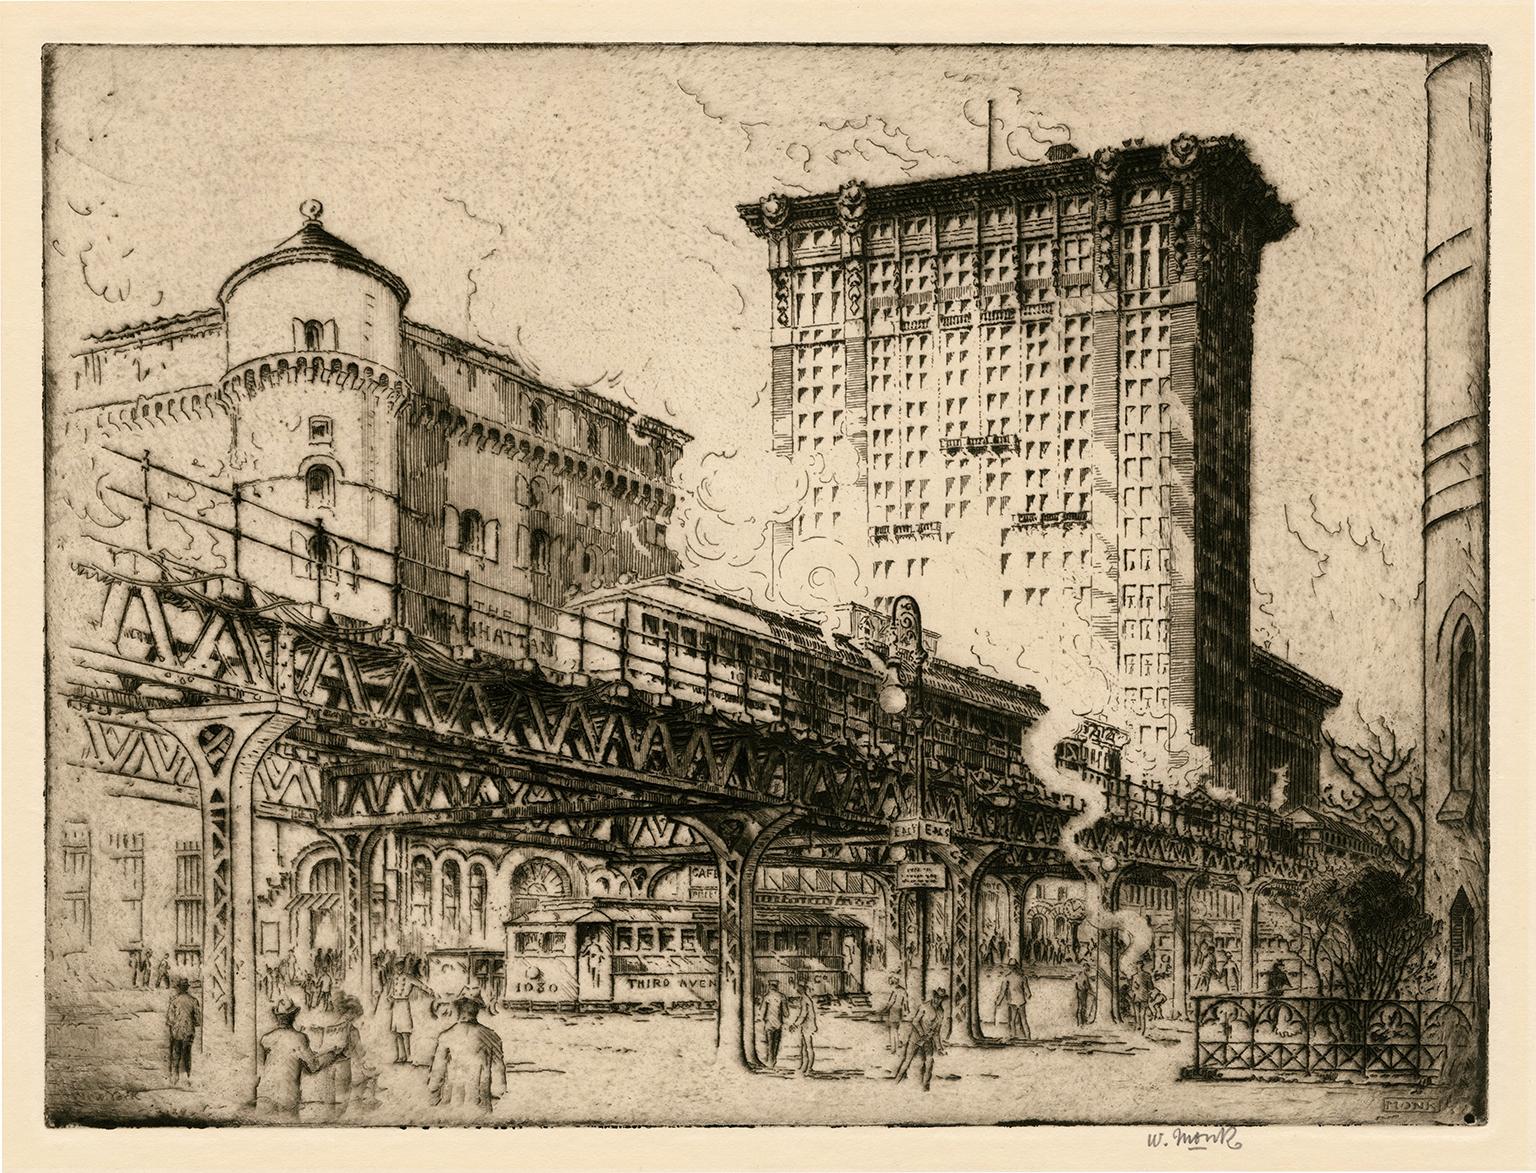 The Elevated, East 42nd Street, New York